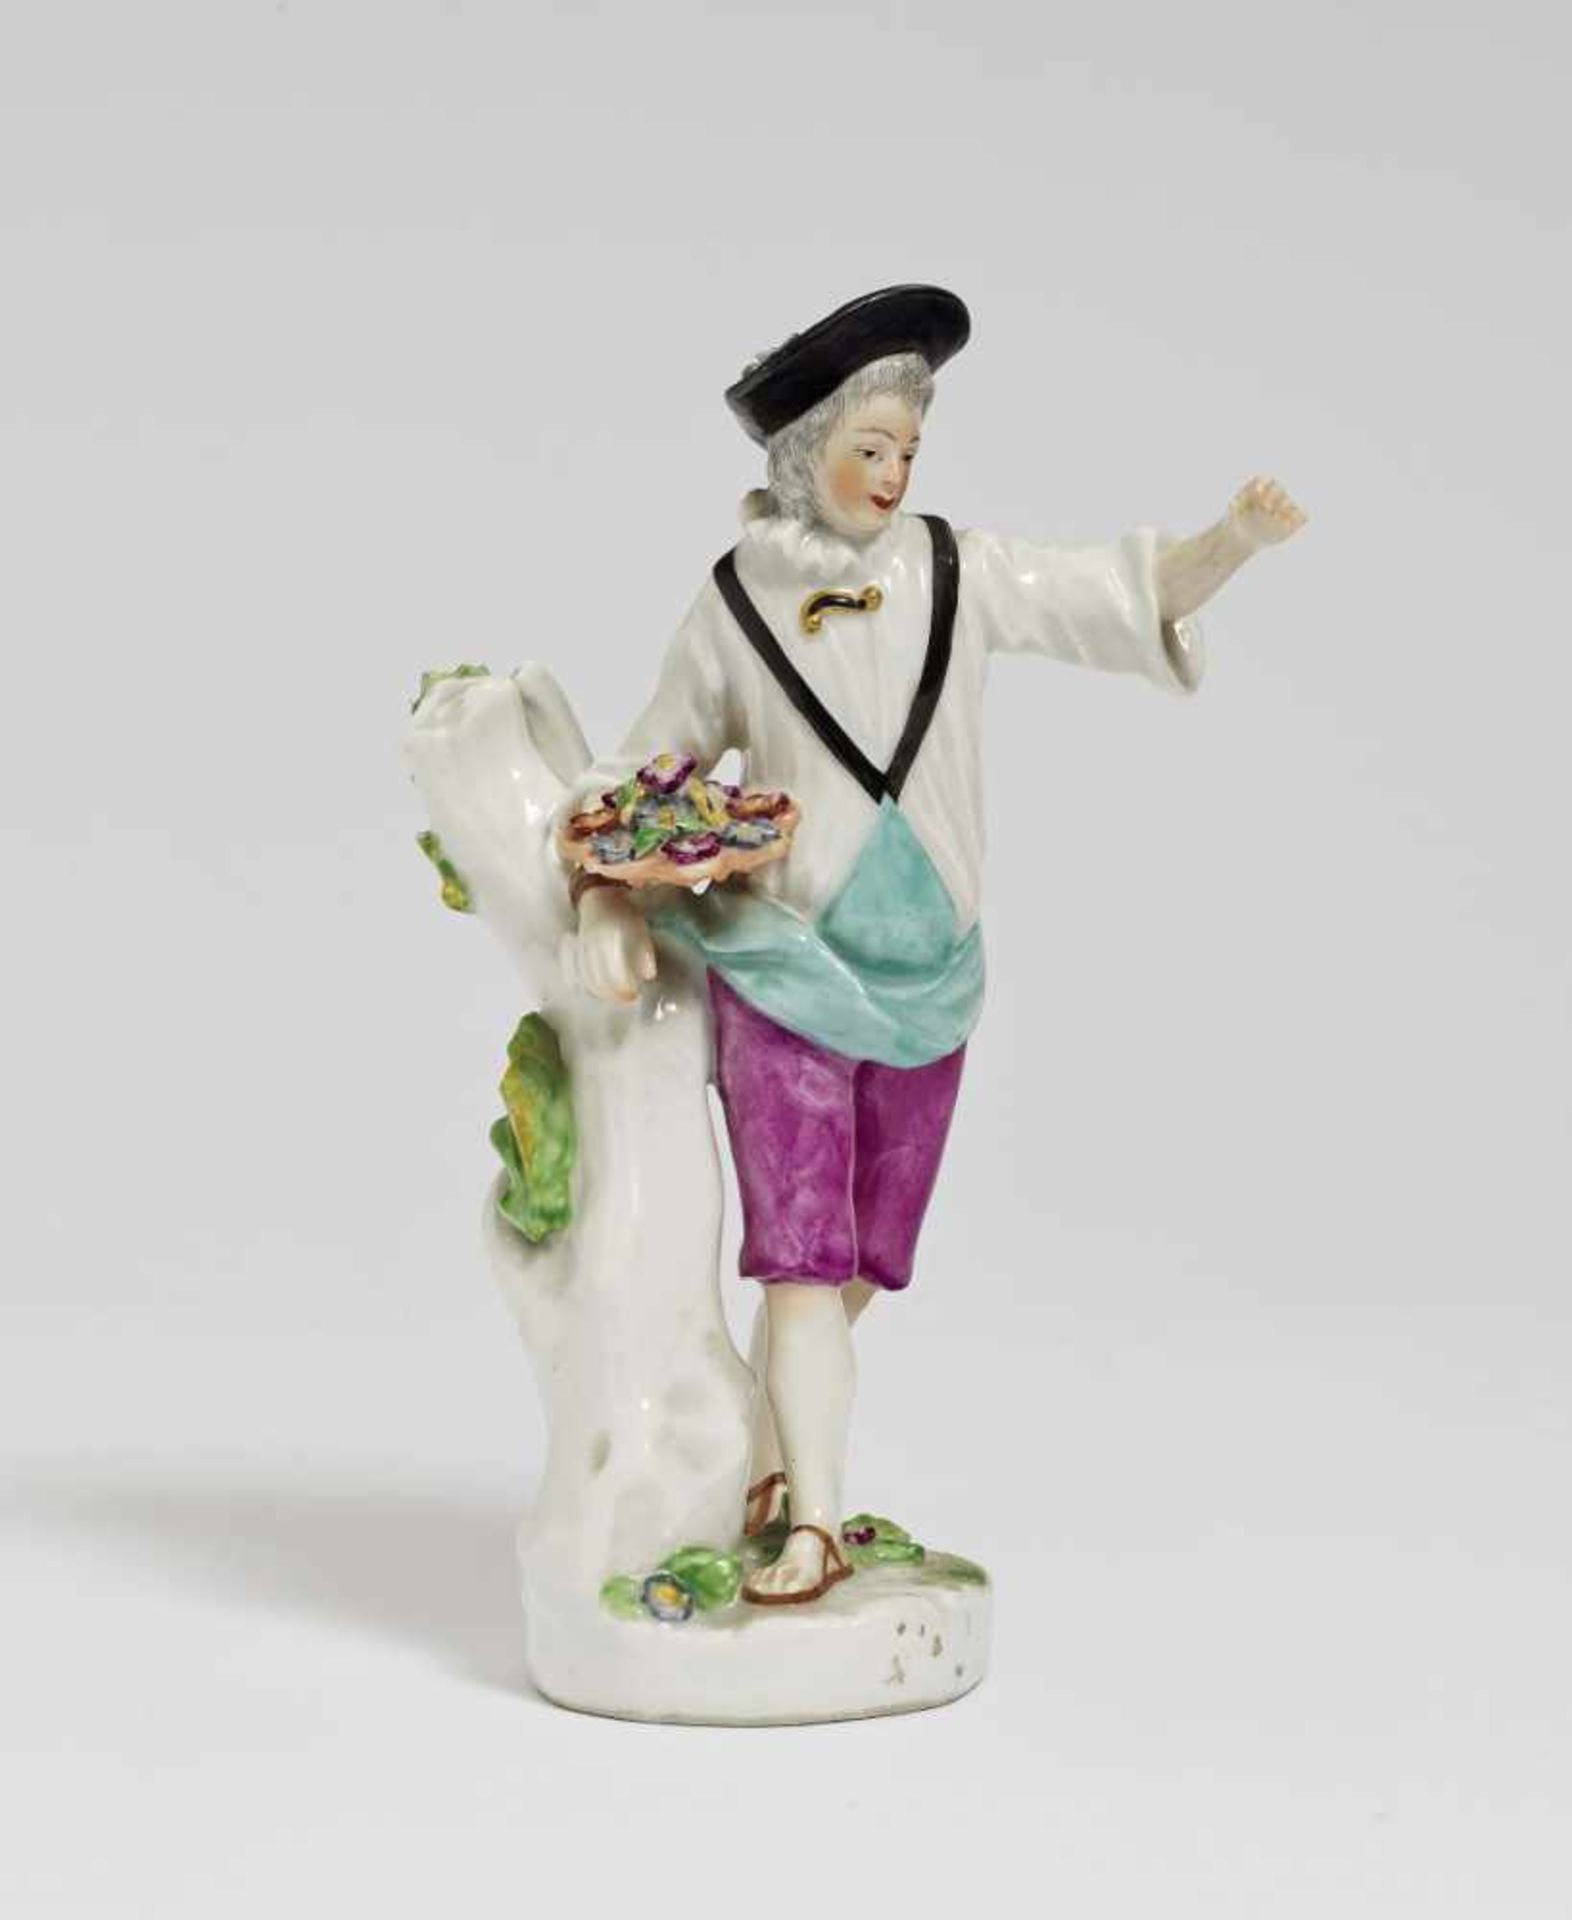 A figure of a gardenerVienna, 18th century Porcelain. Polychrome and gold decoration. Blue shield